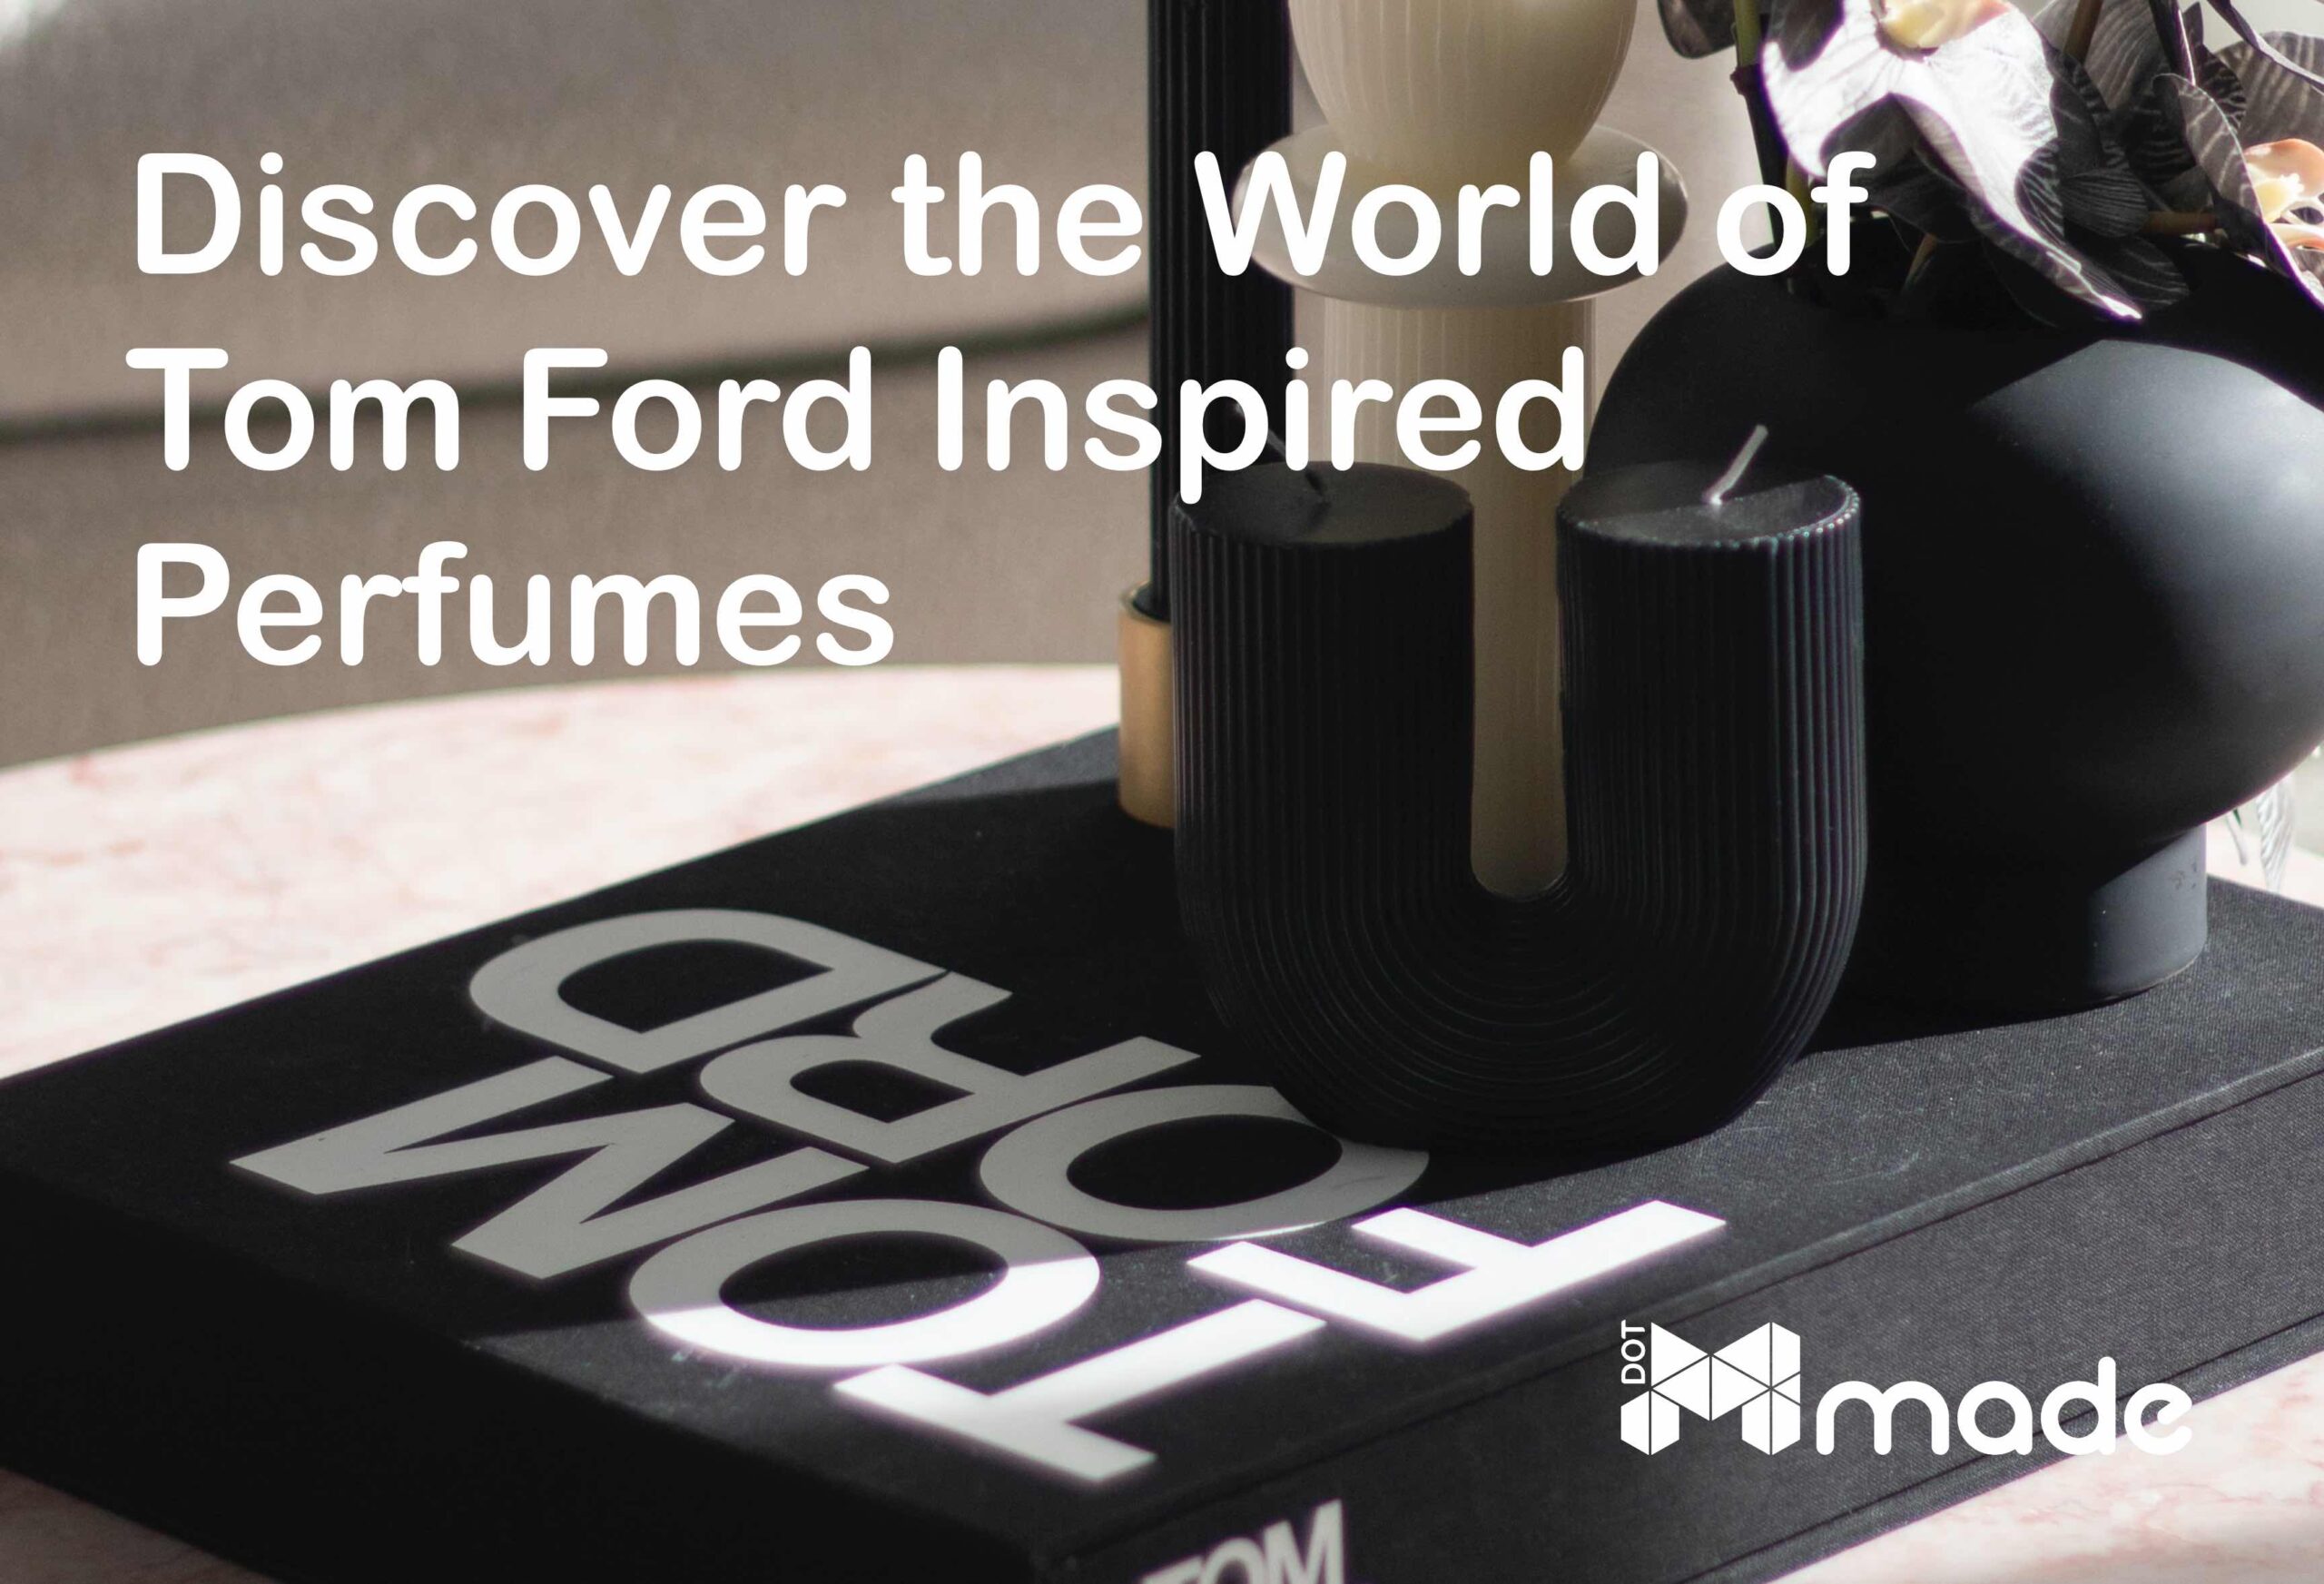 Discover the World of Tom Ford Inspired Perfumes